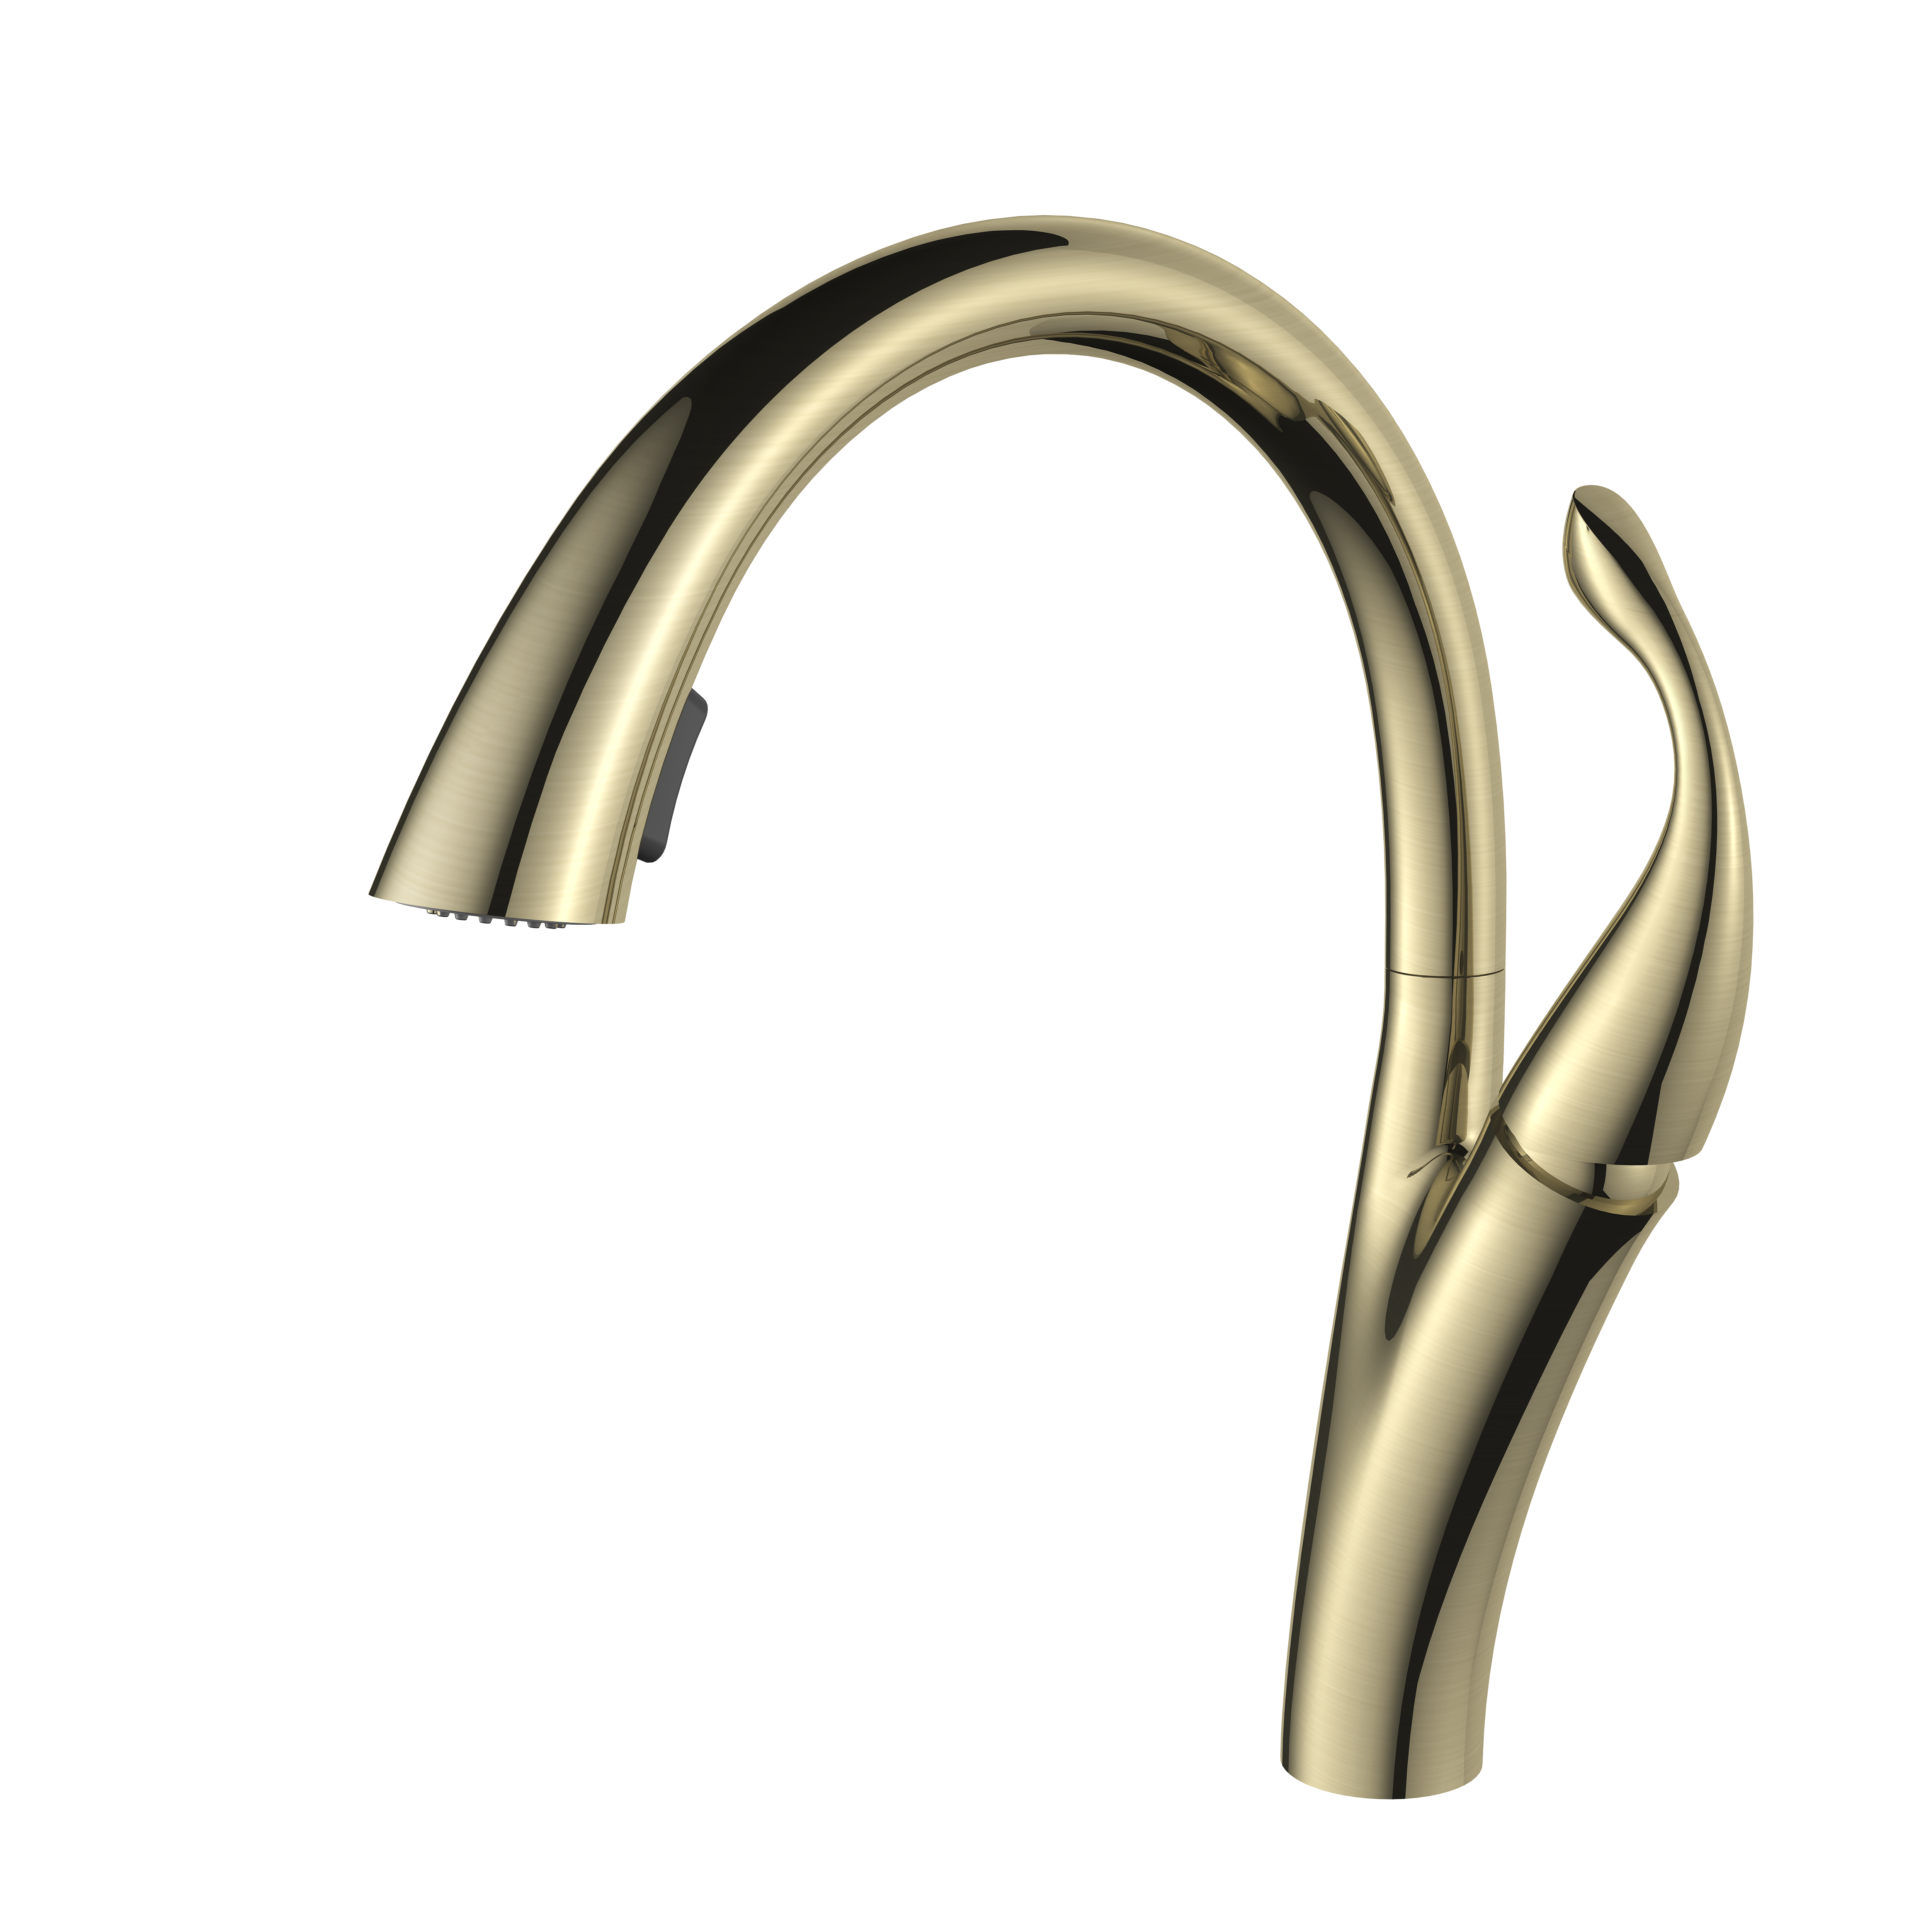 Brushed Gold Brass Material Pull Down Kitchen Faucet Mixer